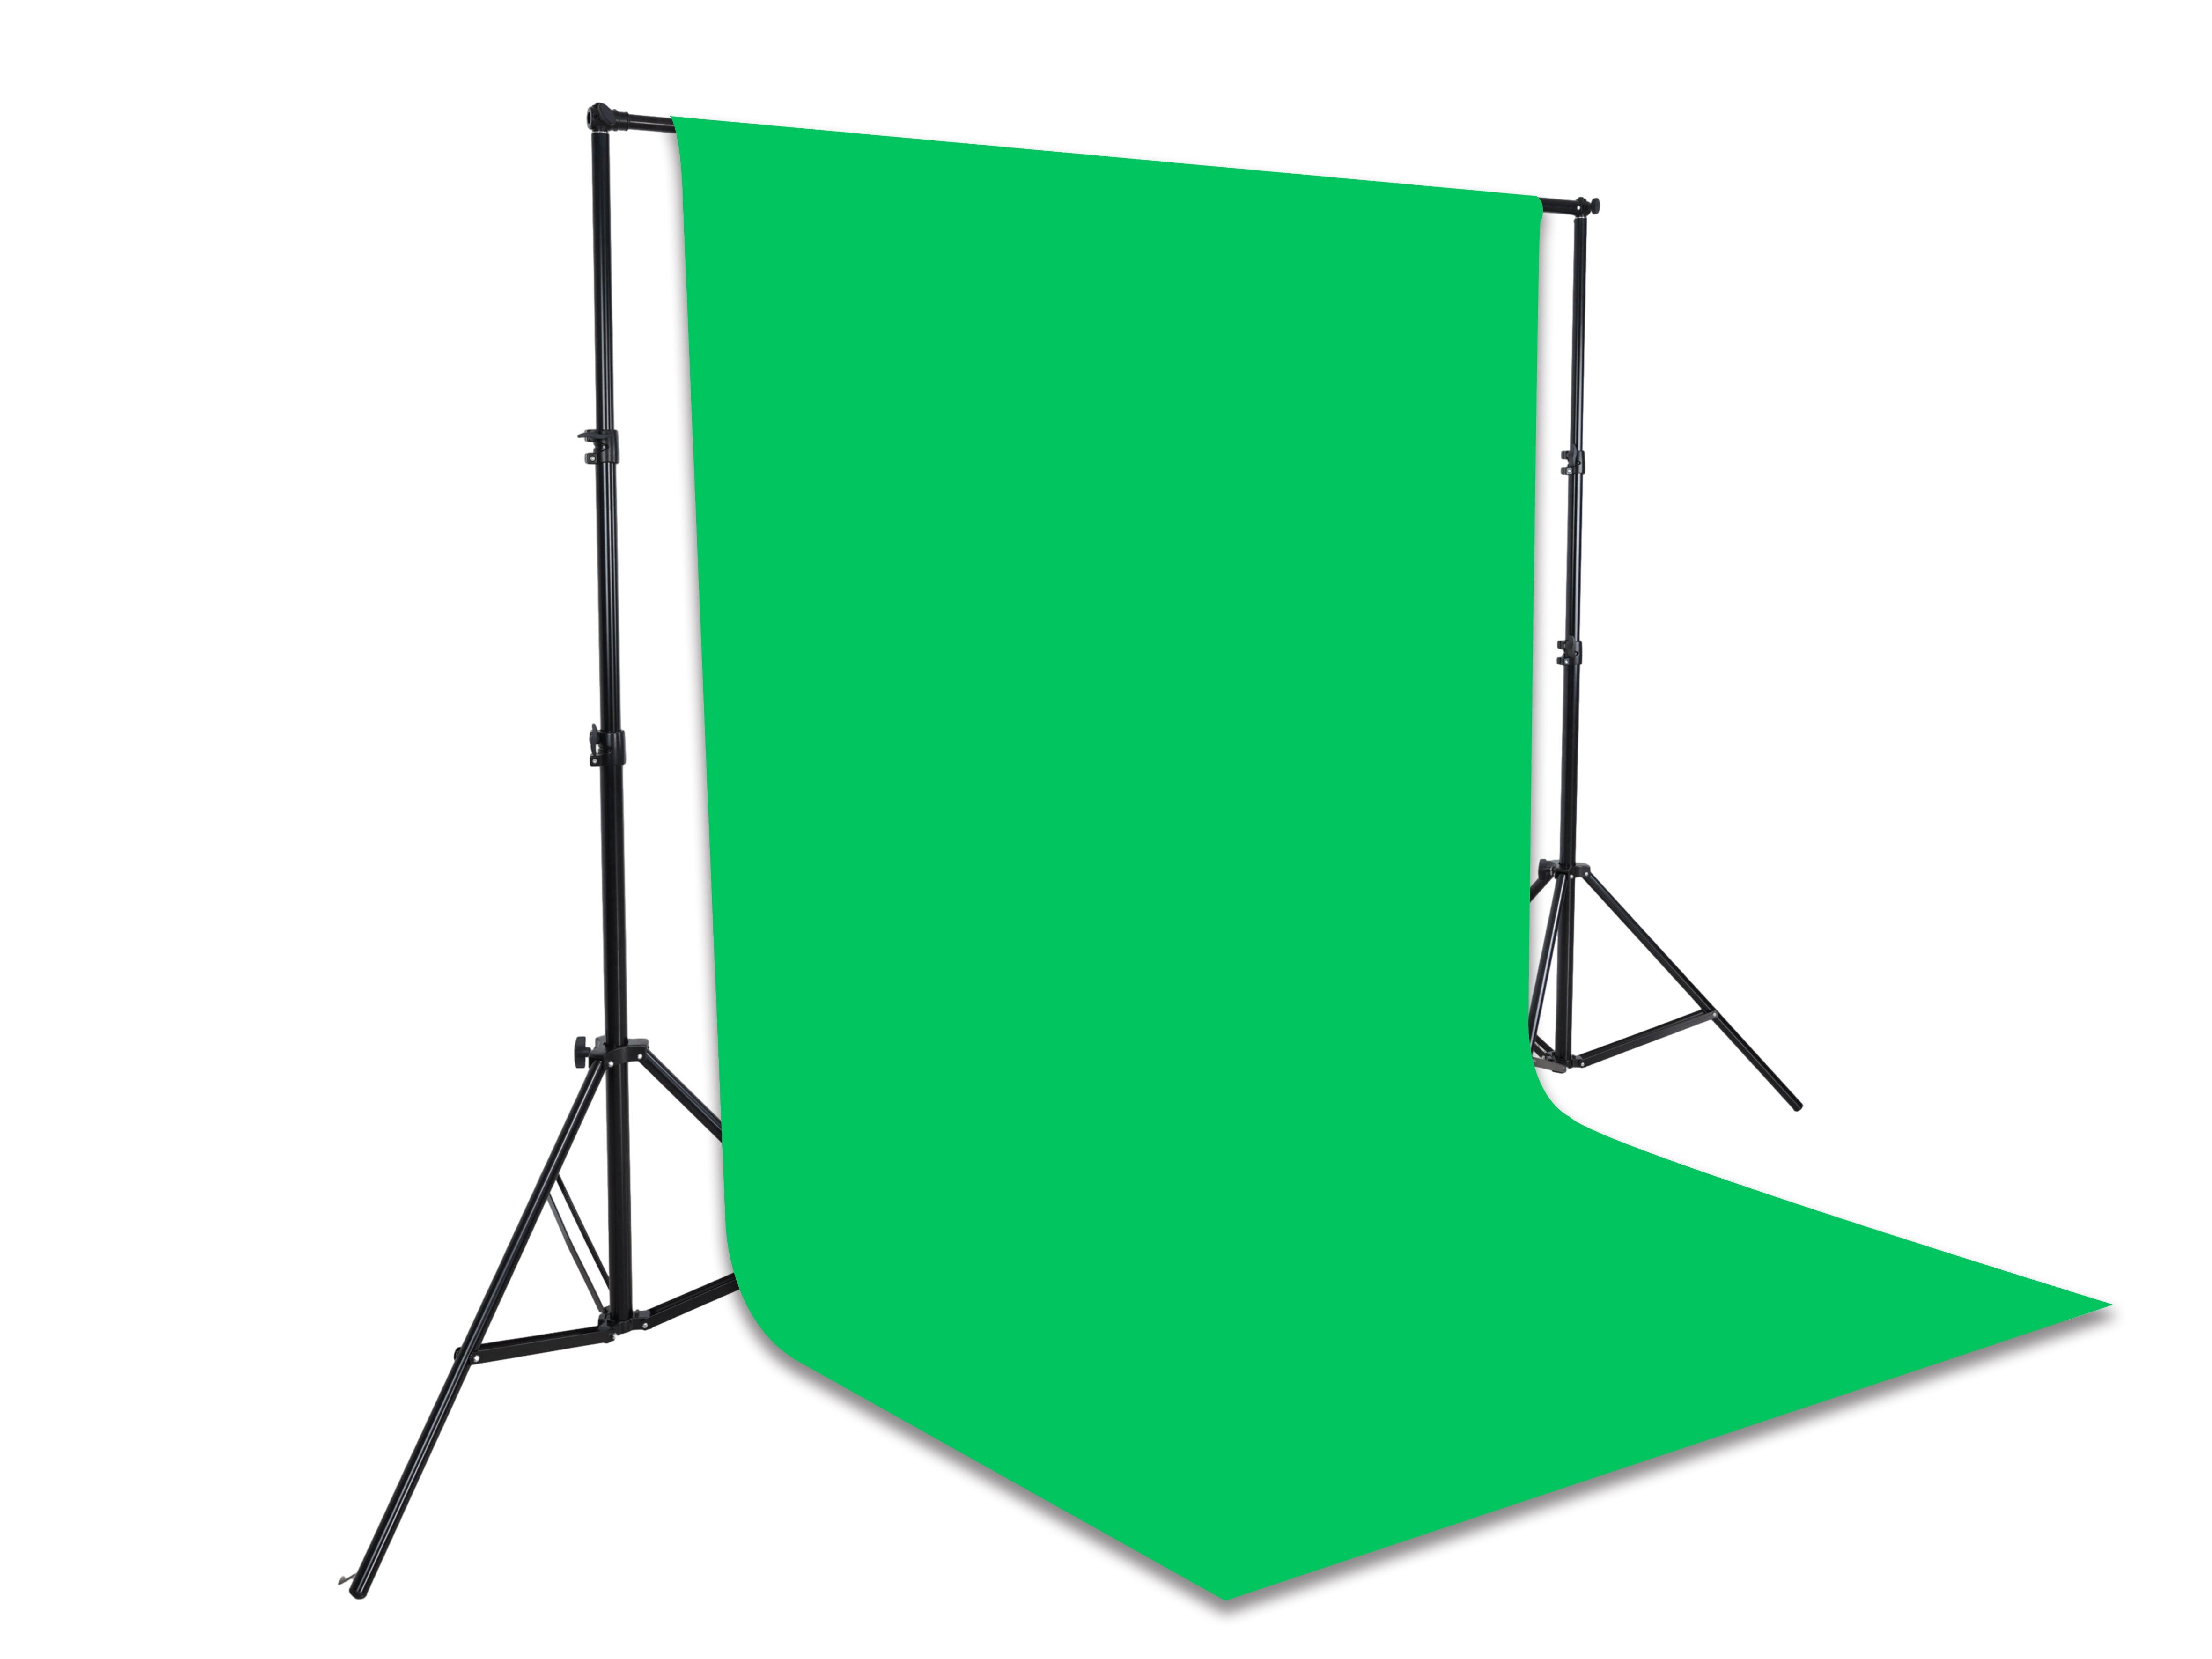 Kate 3x2.8m Adjustable Frame Kit Stand for Photography